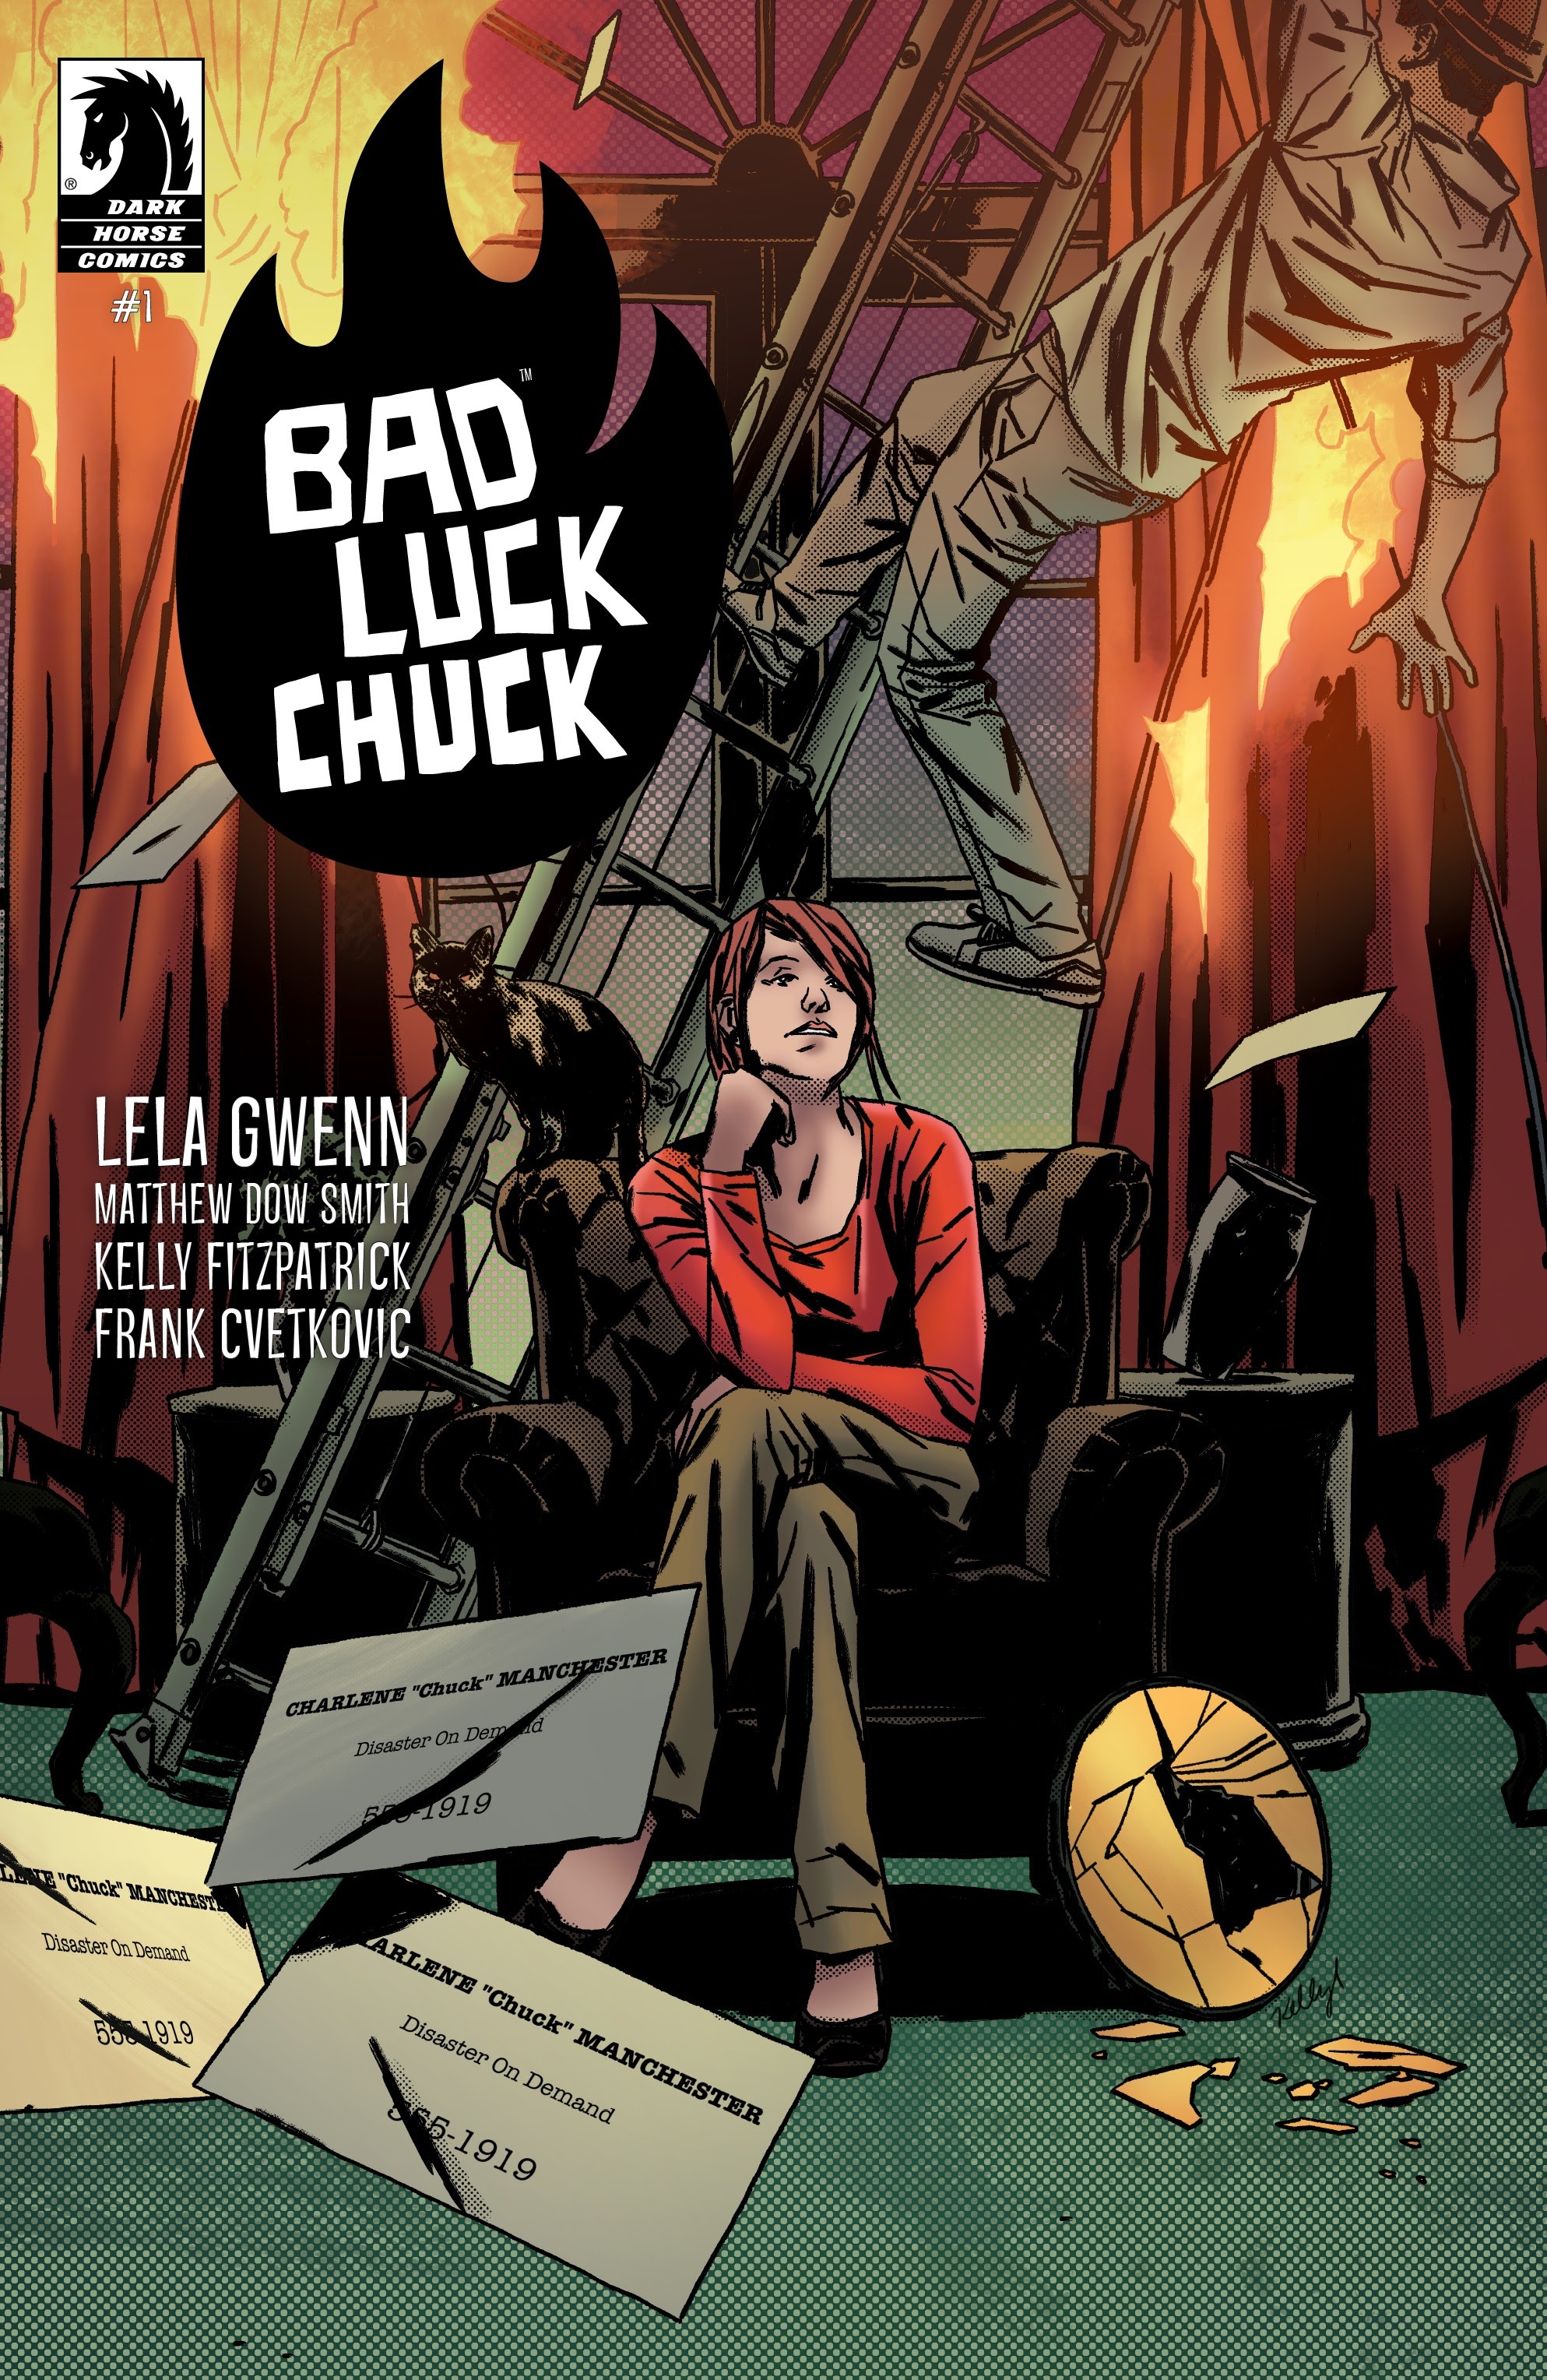 Read online Bad Luck Chuck comic -  Issue #1 - 1